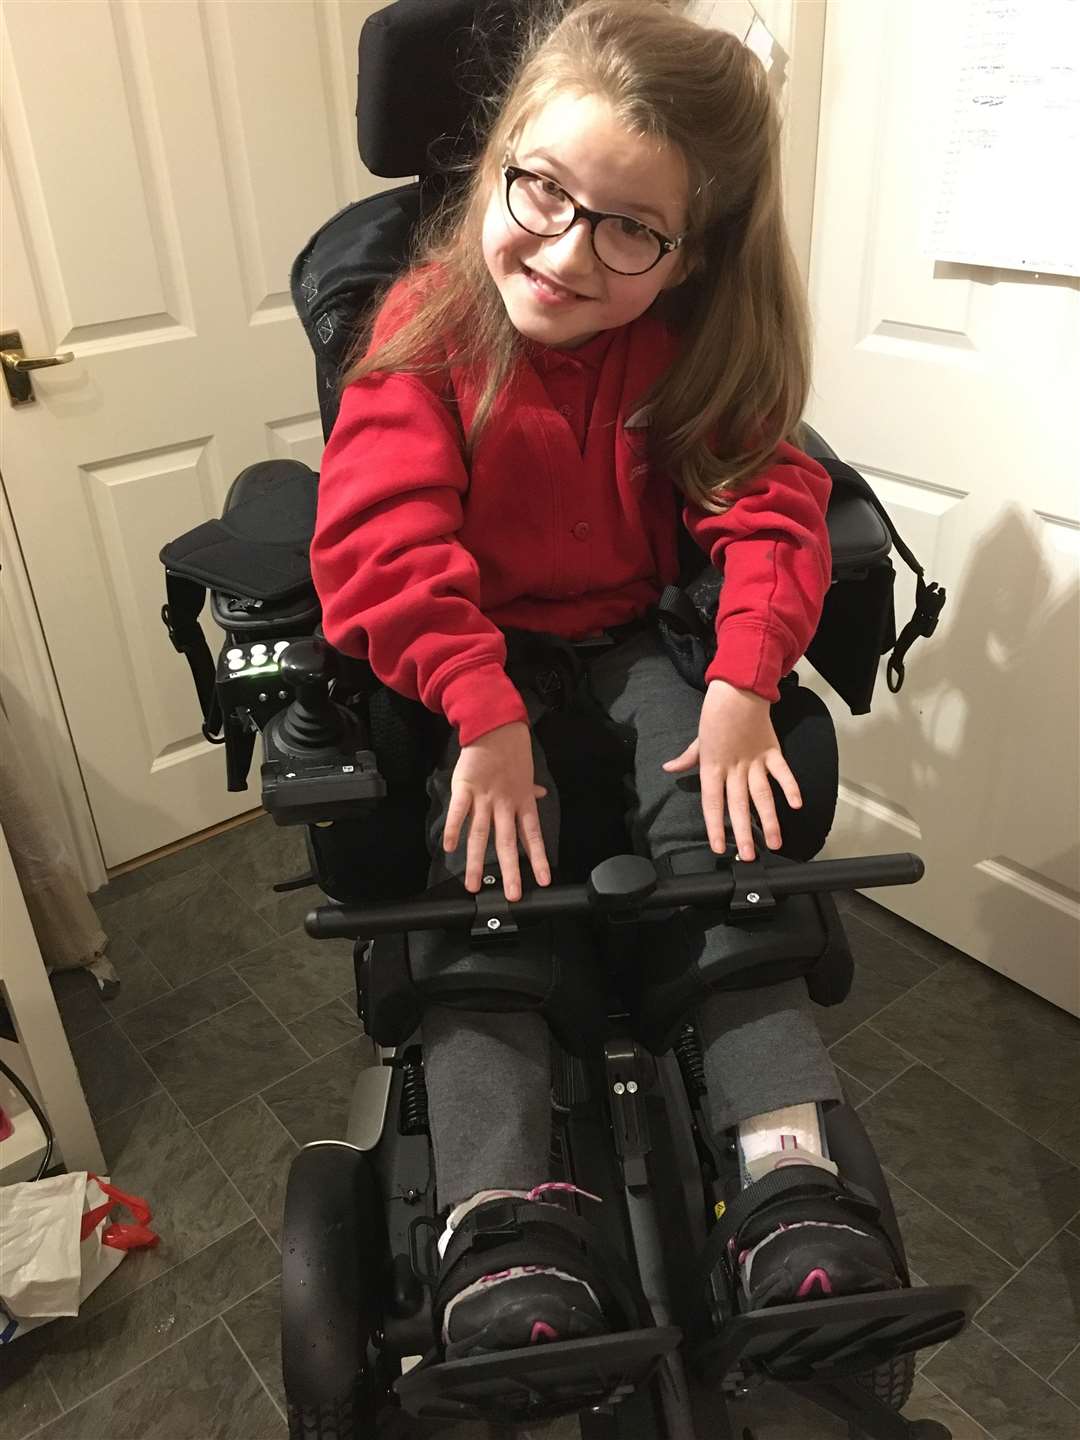 Sophia Walsh is delighted with her new chair.